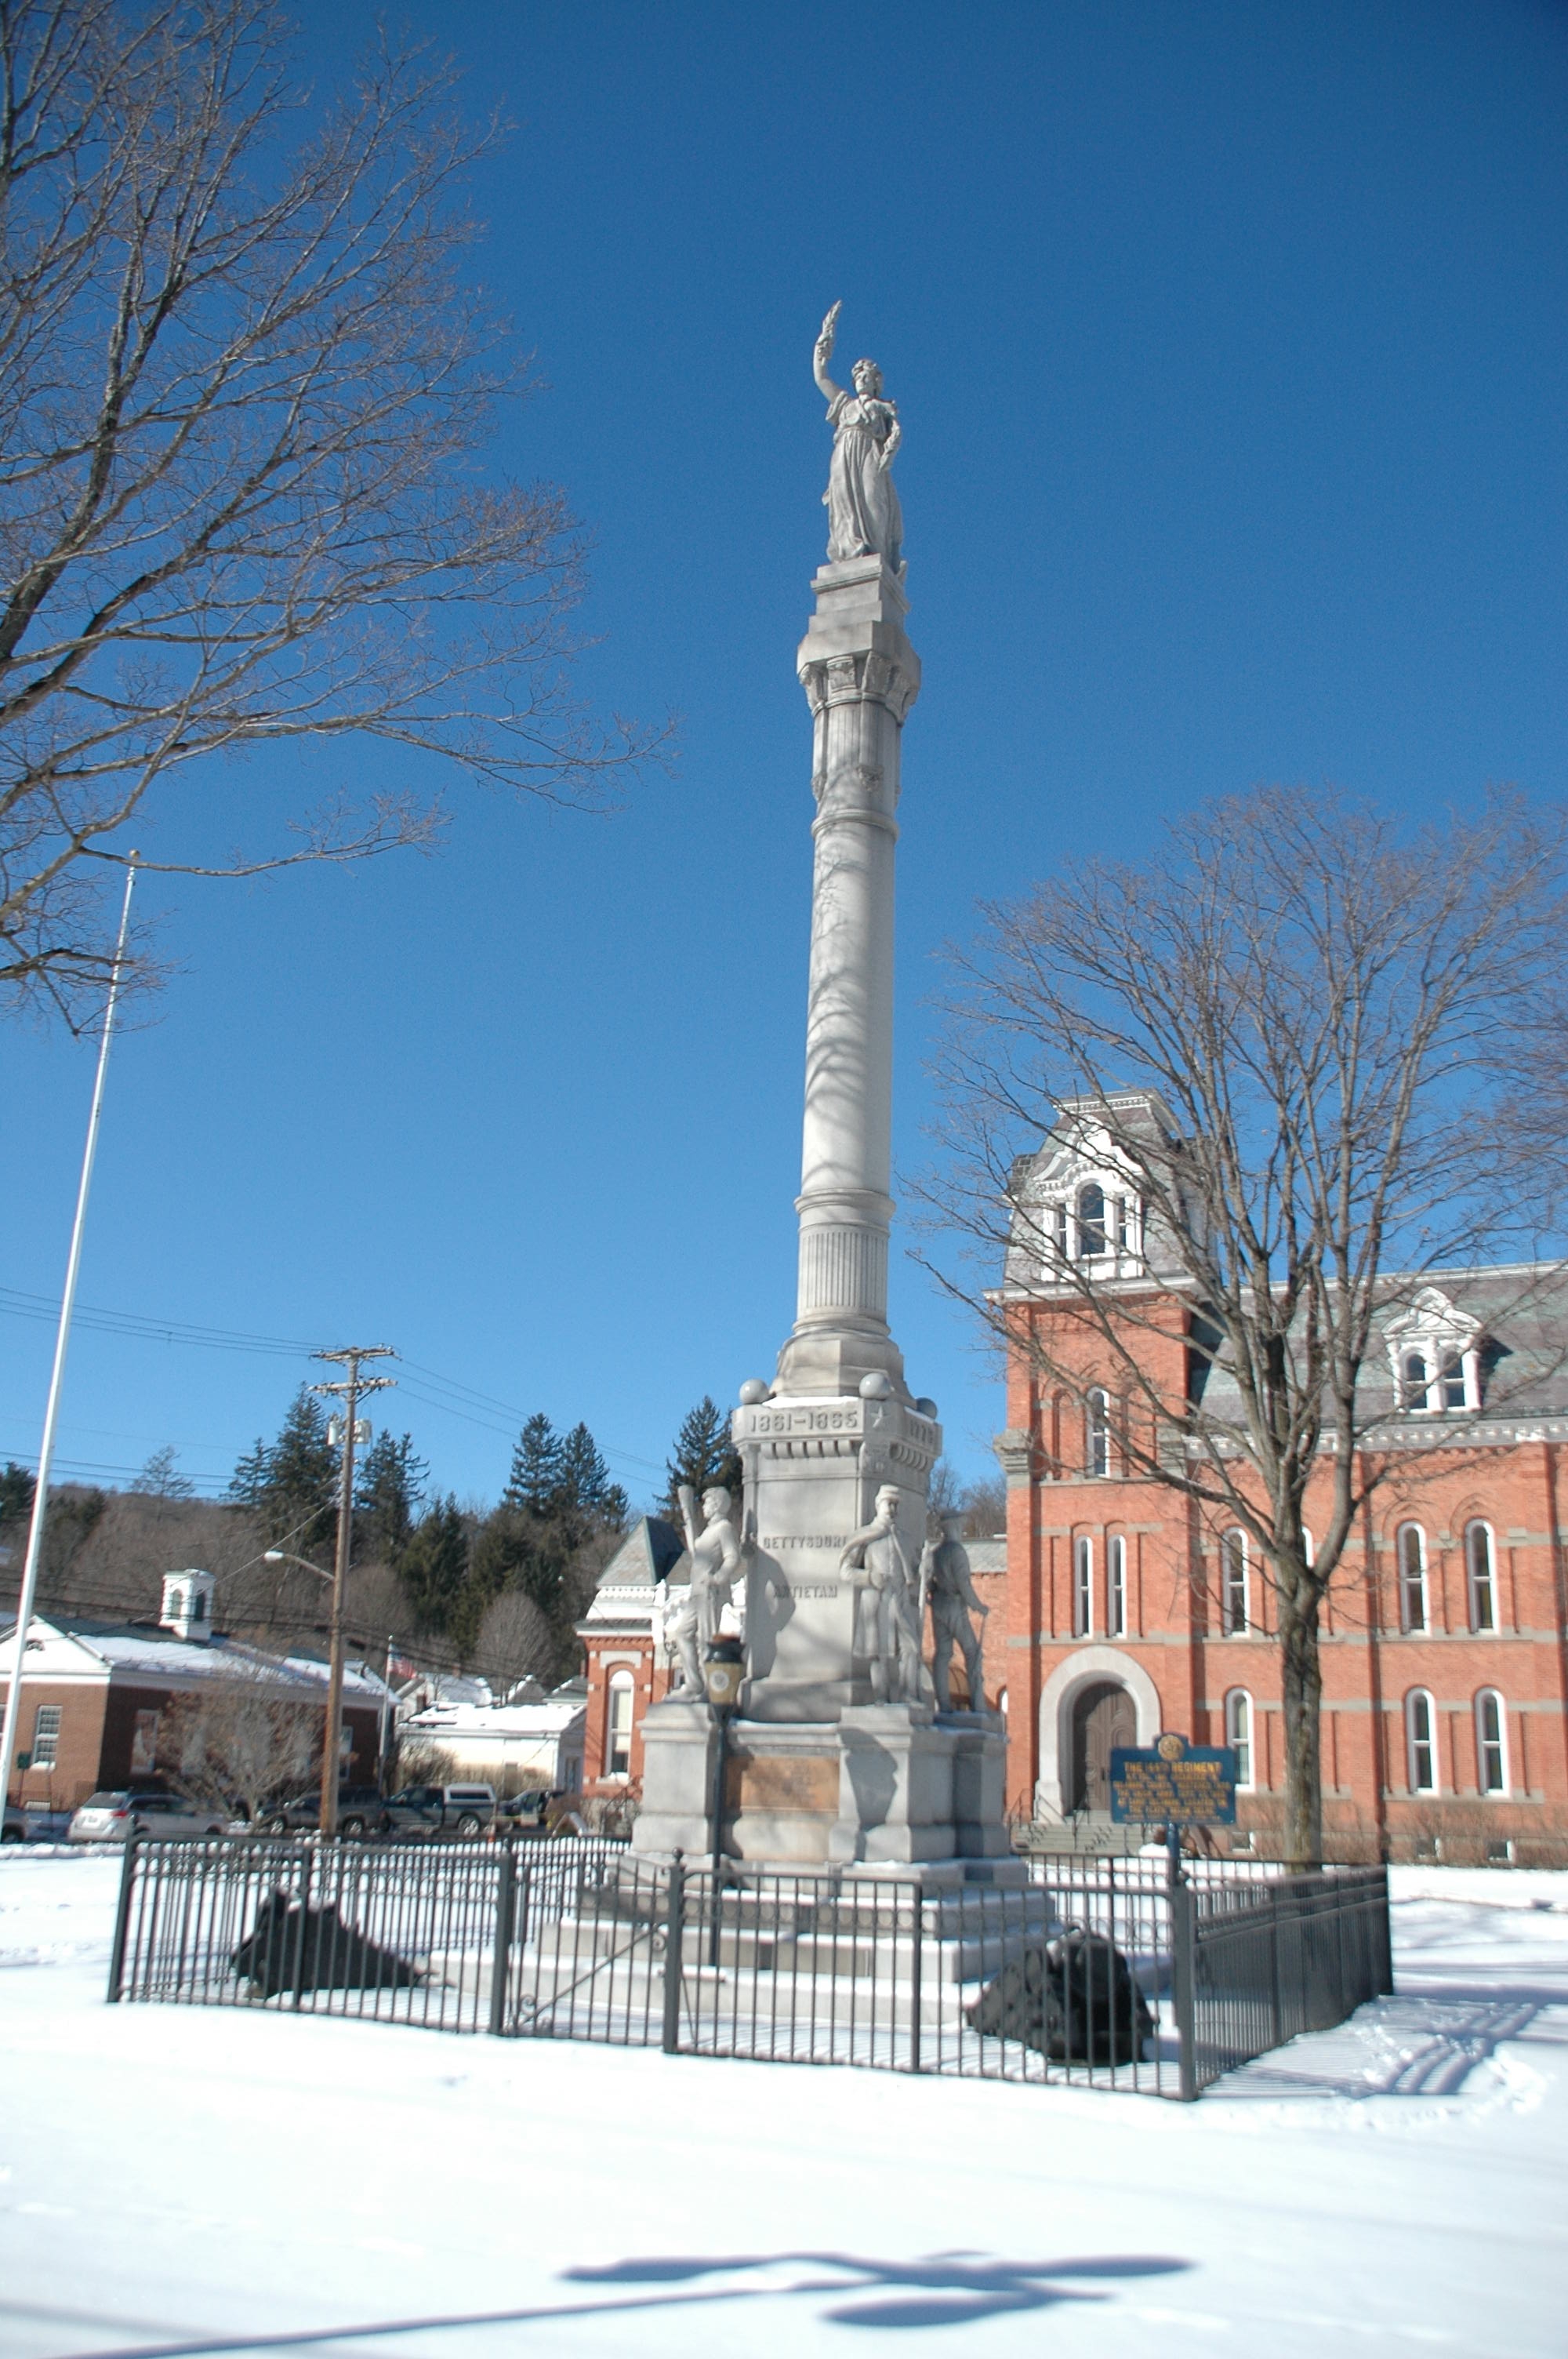 The 144th Regiment Memorial and Marker